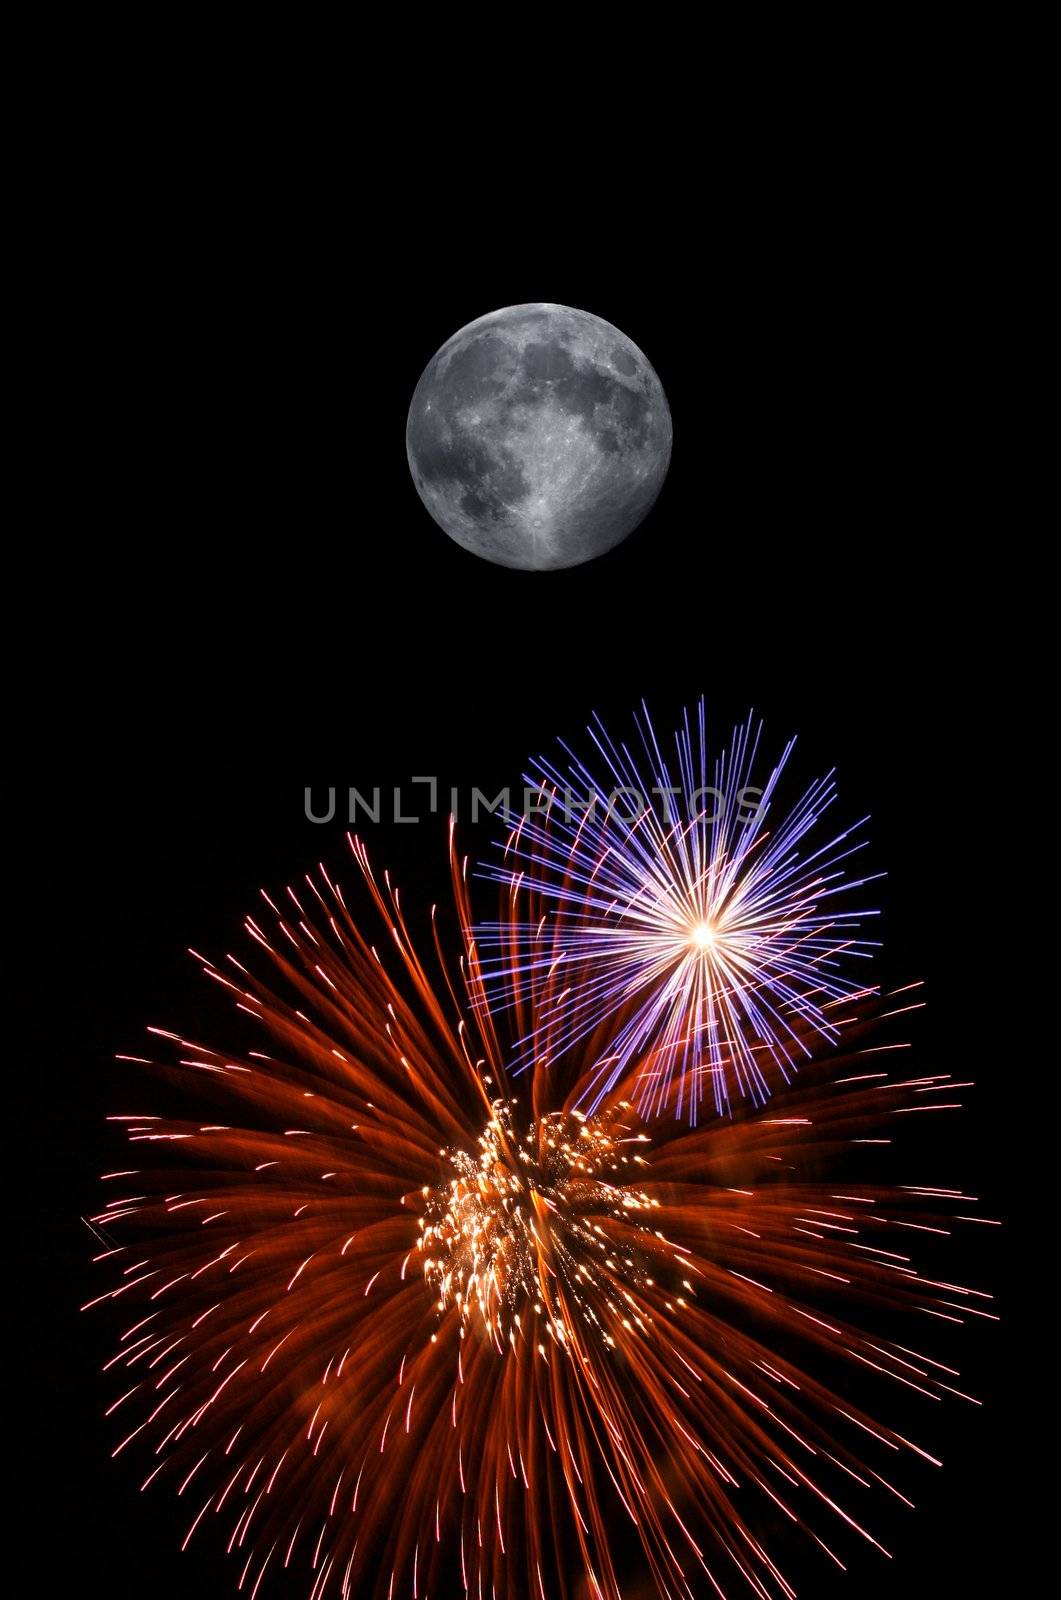 Full moon and fireworks exploding on clear night